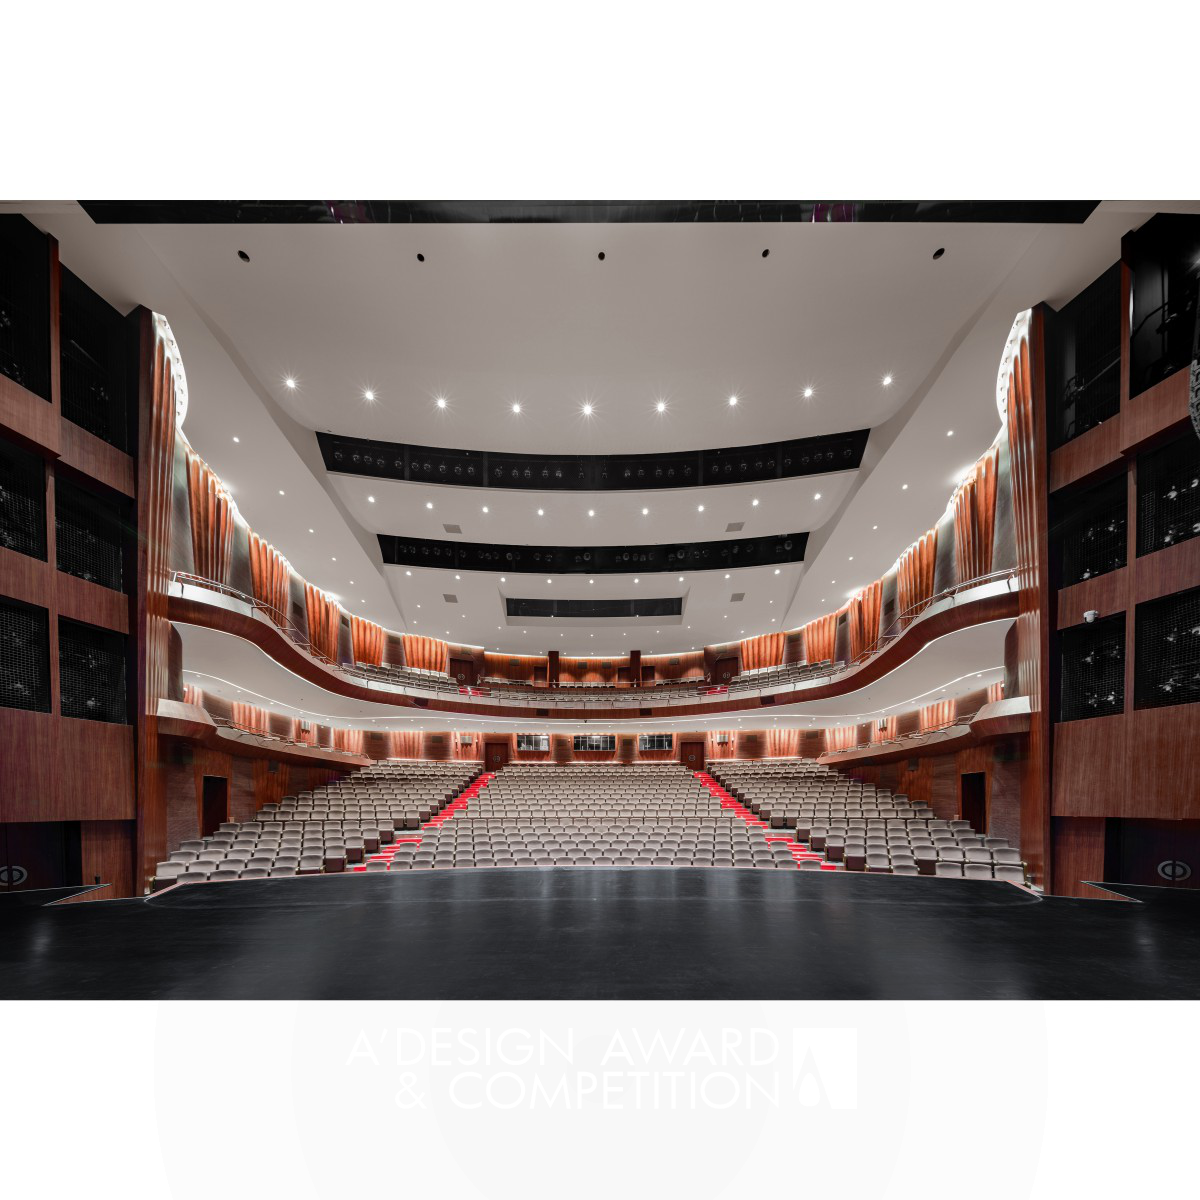 Wanping Theater by Tongji Architectural Design (Group) Co., Ltd